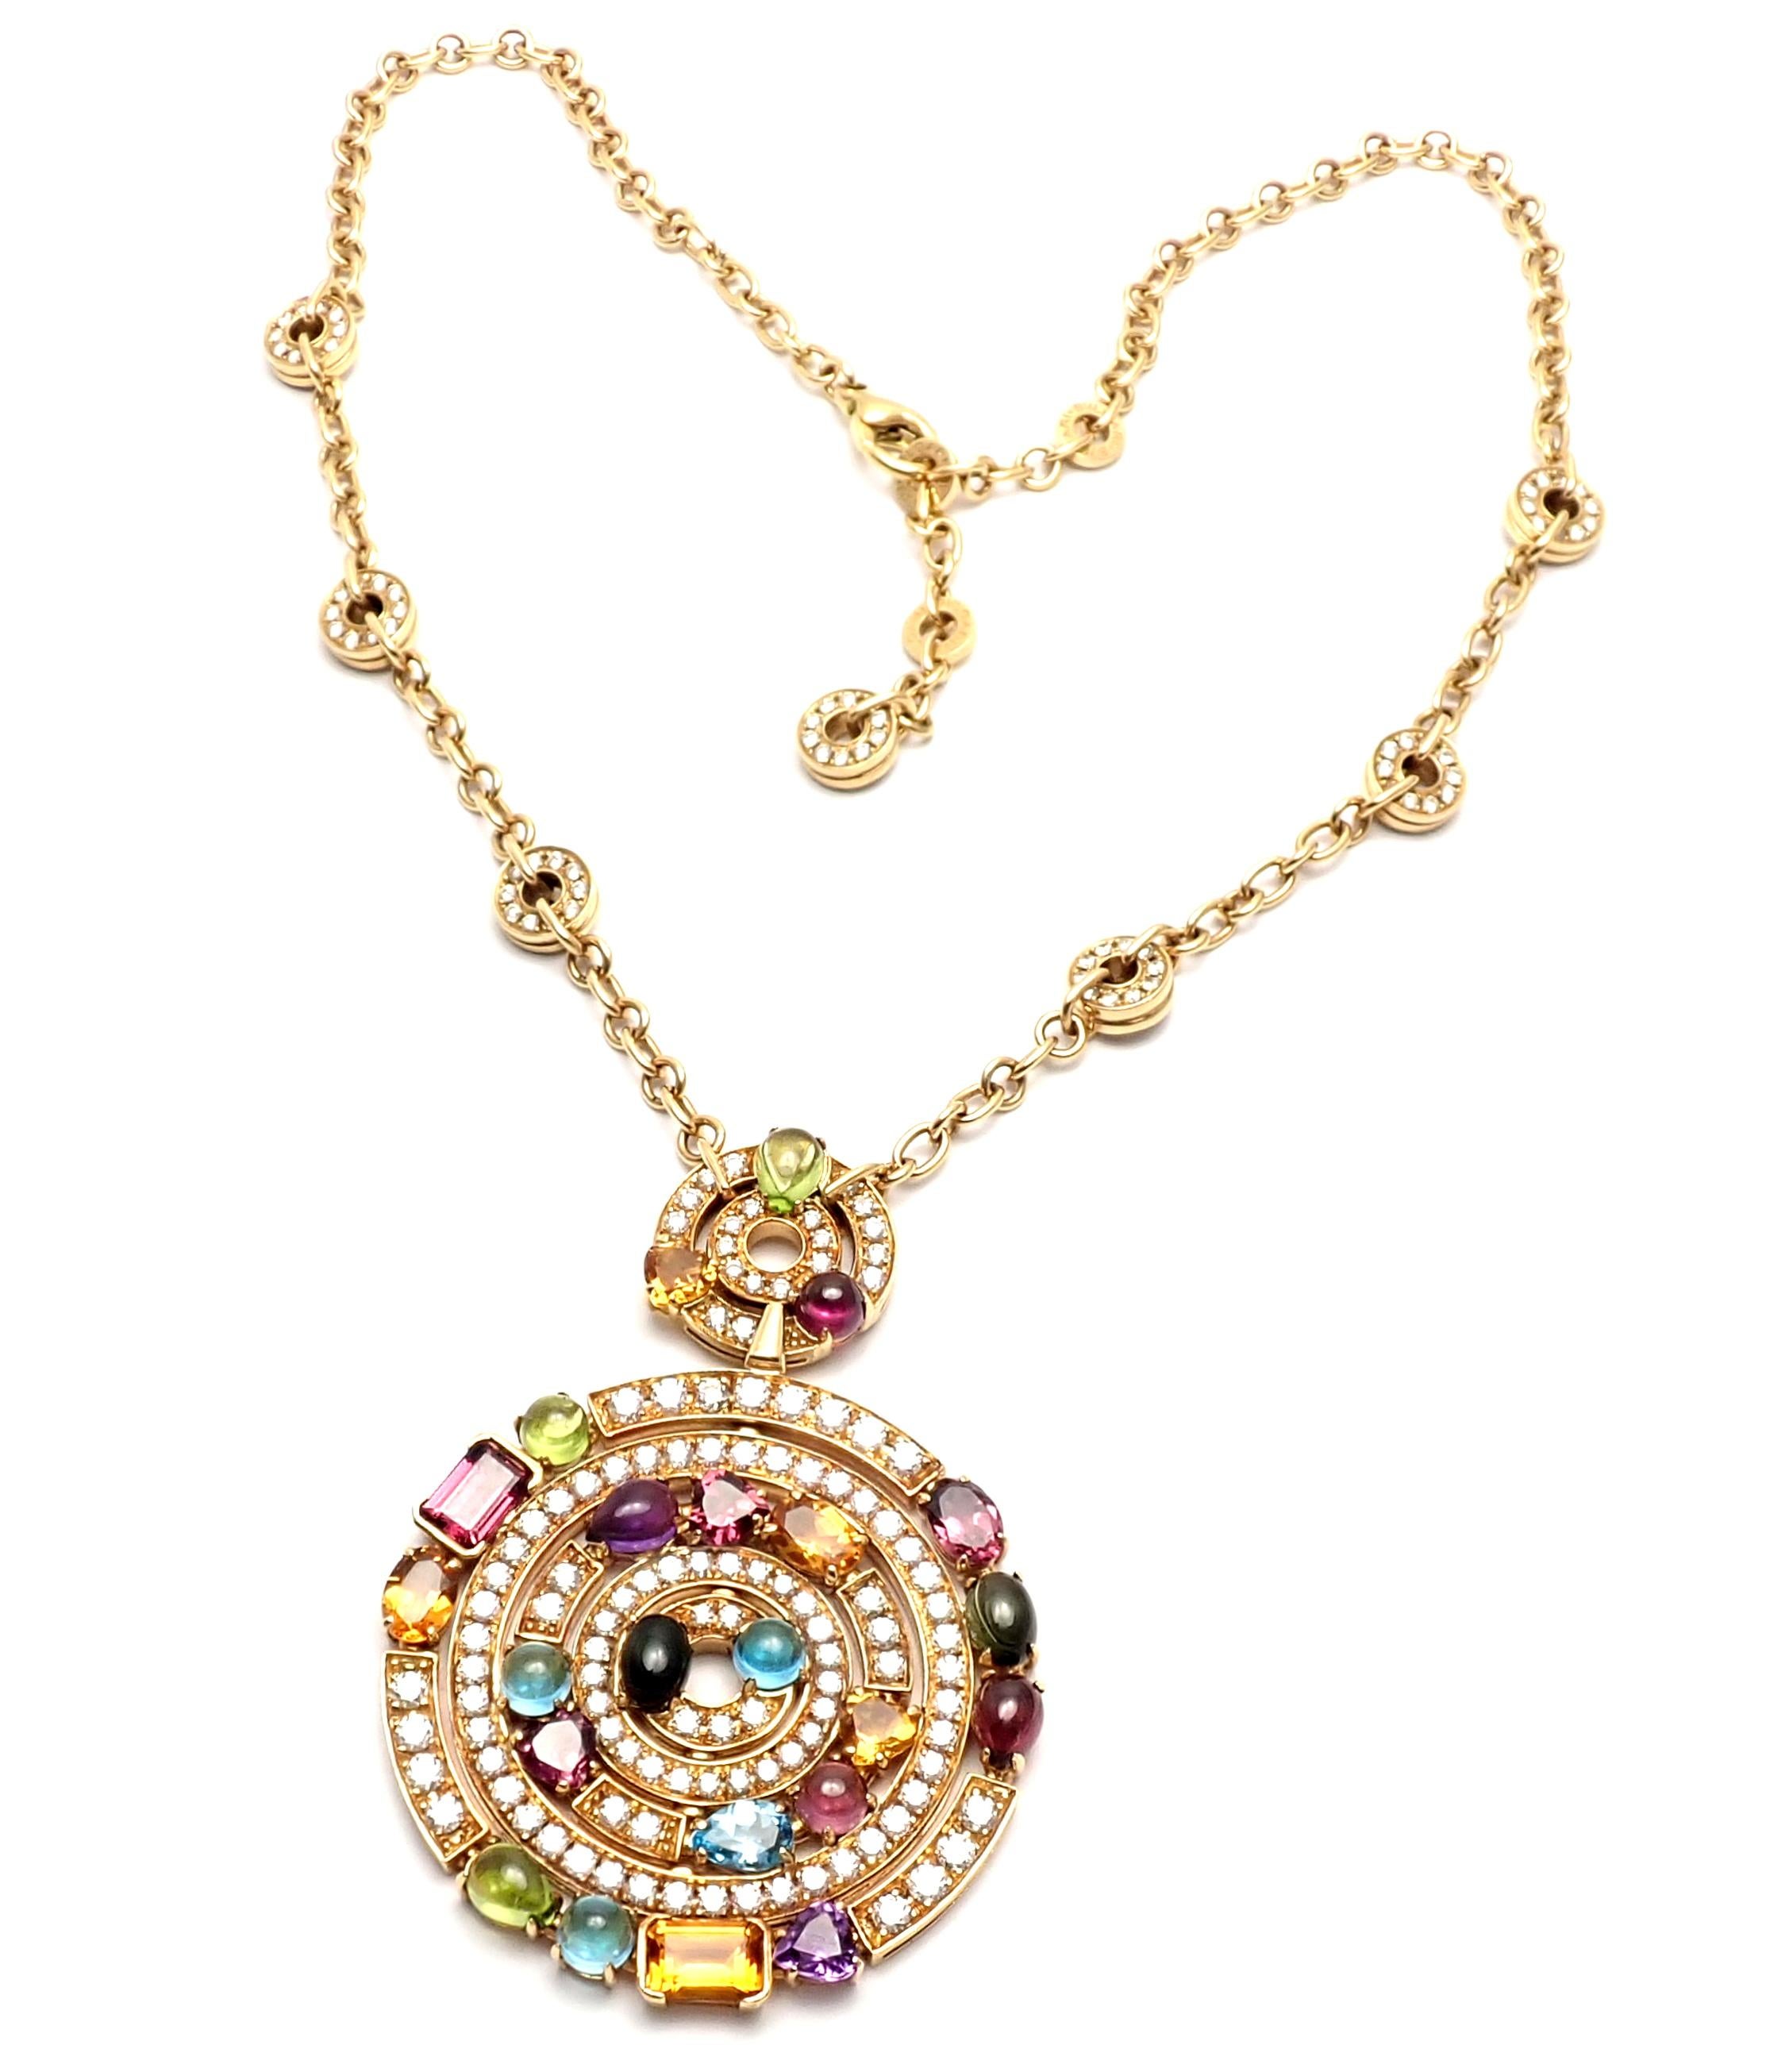 18k Yellow Gold Diamond Color Stone Astrale Large Pendant Necklace by Bulgari.  
With 171 round brilliant cut diamonds VVS1 clarity E color total weight approx. 5ct
Blue Topazes, Amethysts, Green Tourmalines, Peridots, Citrine Quartz, Rhodolite